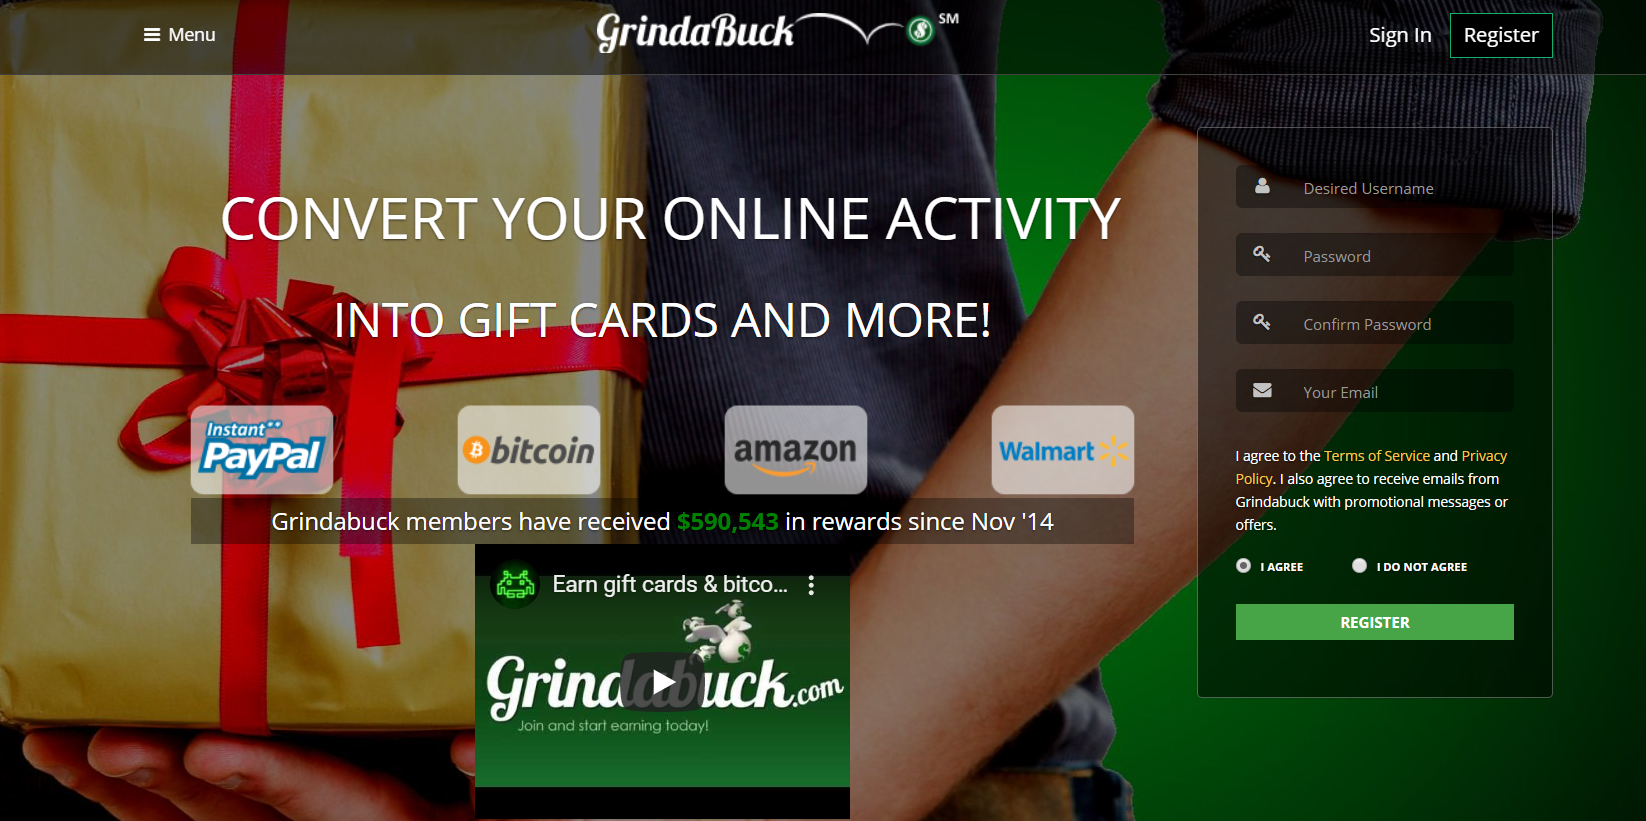 is grindabuck a scam